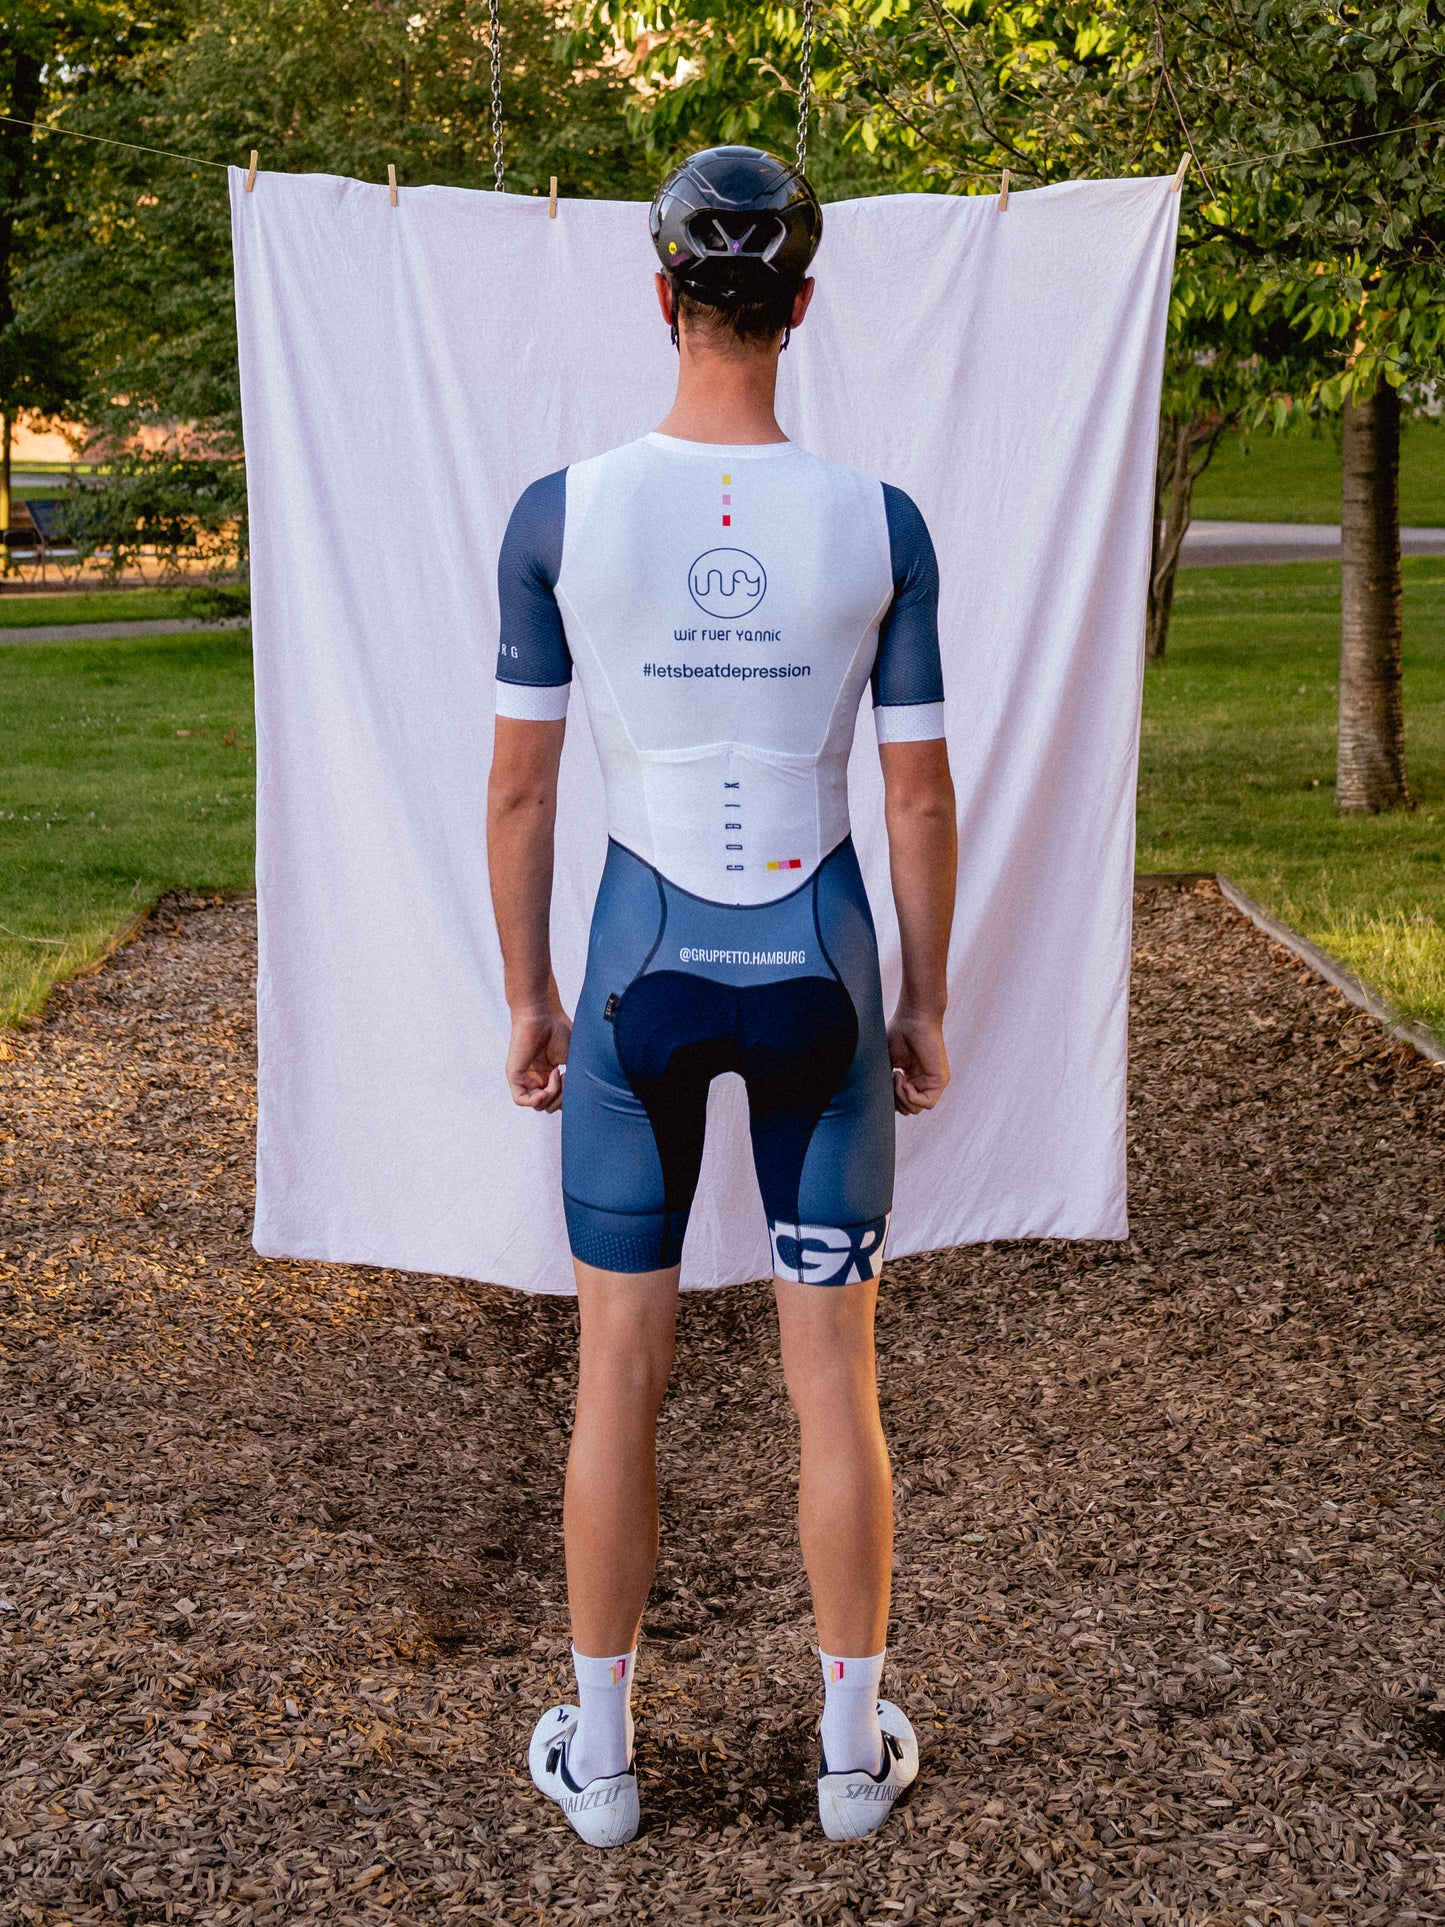 GRUPPETTO RACE SUIT - get dressed for the speedfest